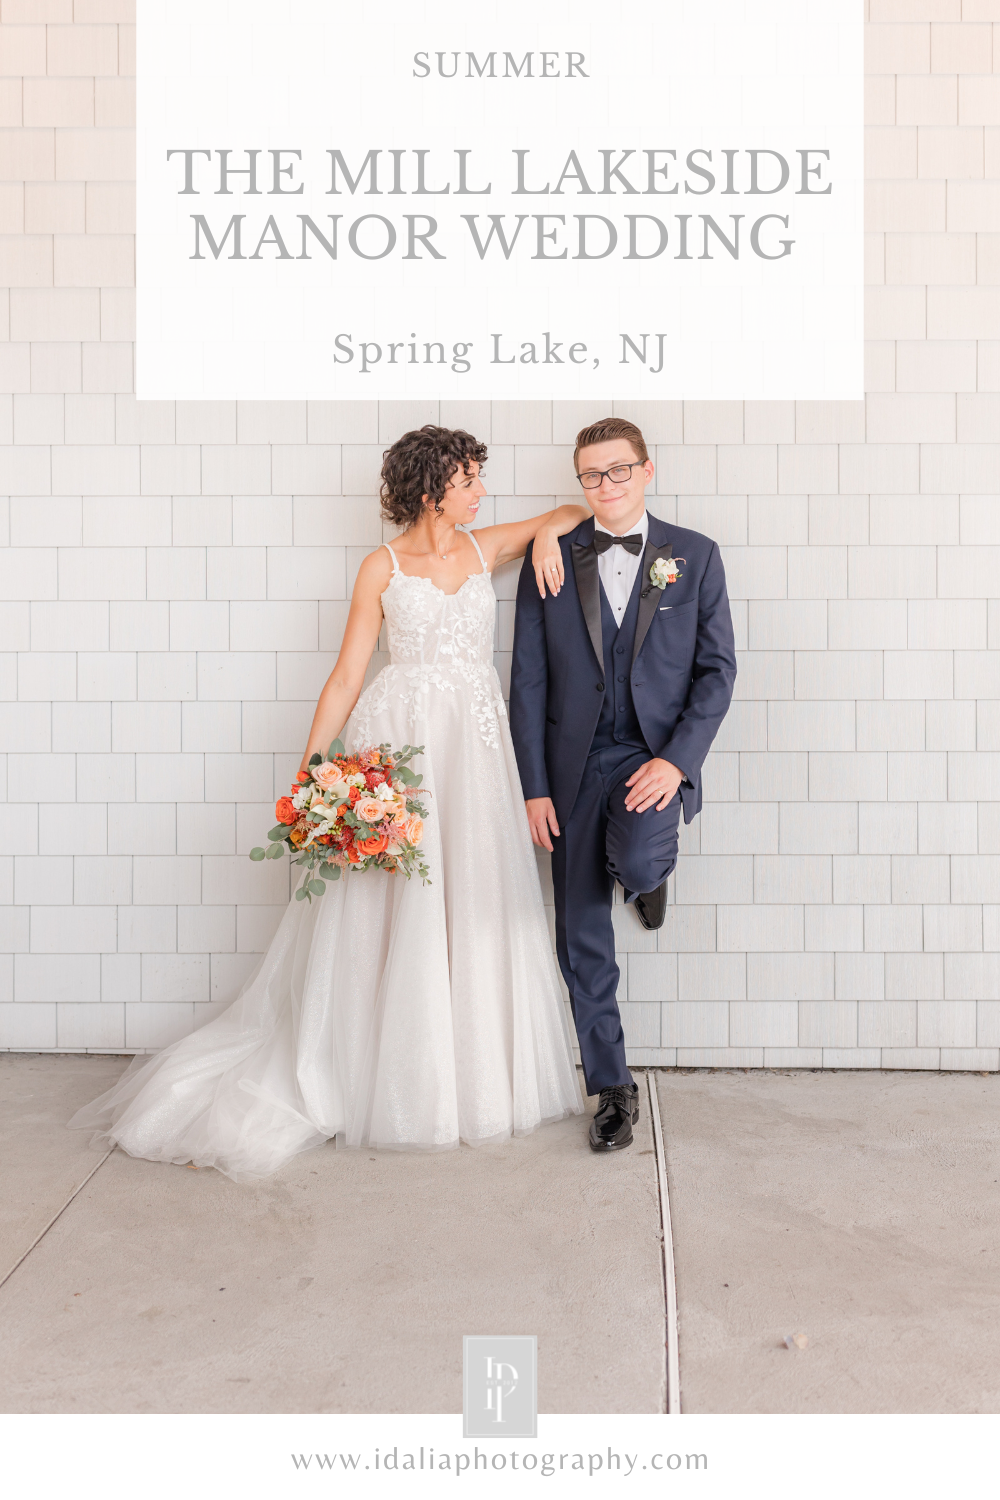 The Mill Lakeside Manor wedding with citrus inspired details photographed by NJ wedding photographer Idalia Photography